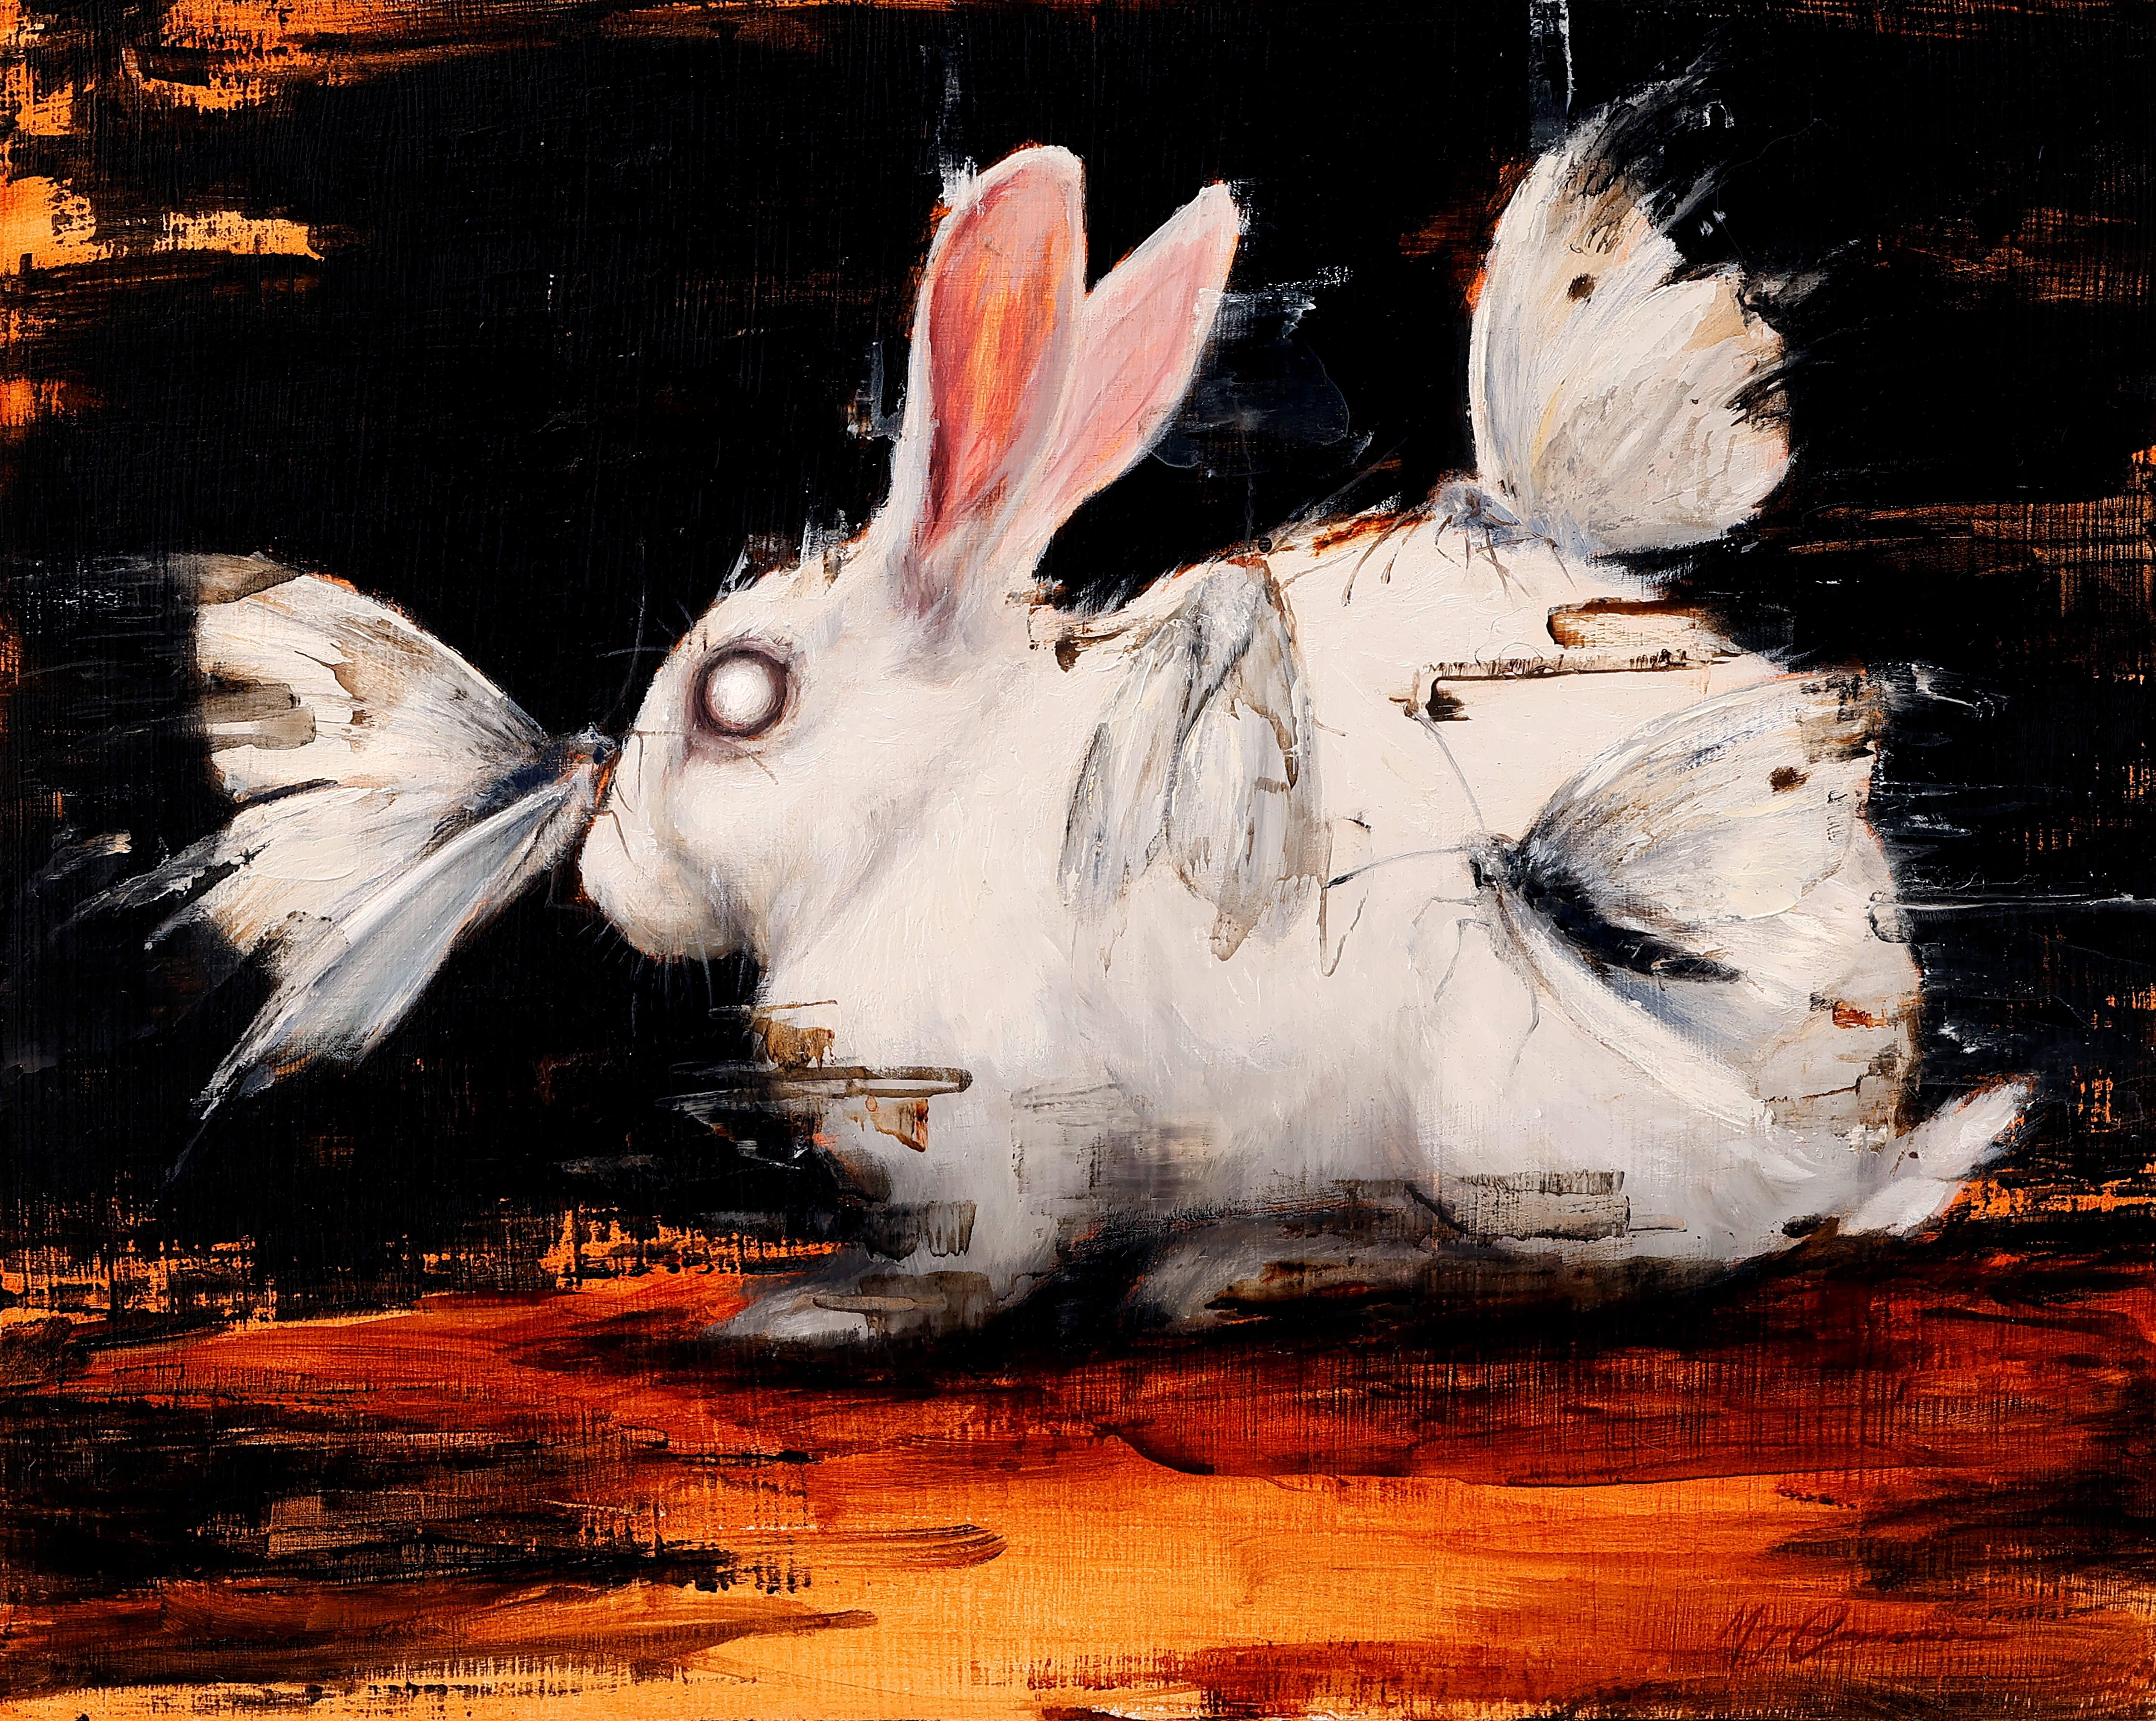 Morgan Cameron Animal Painting - "Moth's Delight, " Oil painting Featuring a white bunny and a moth